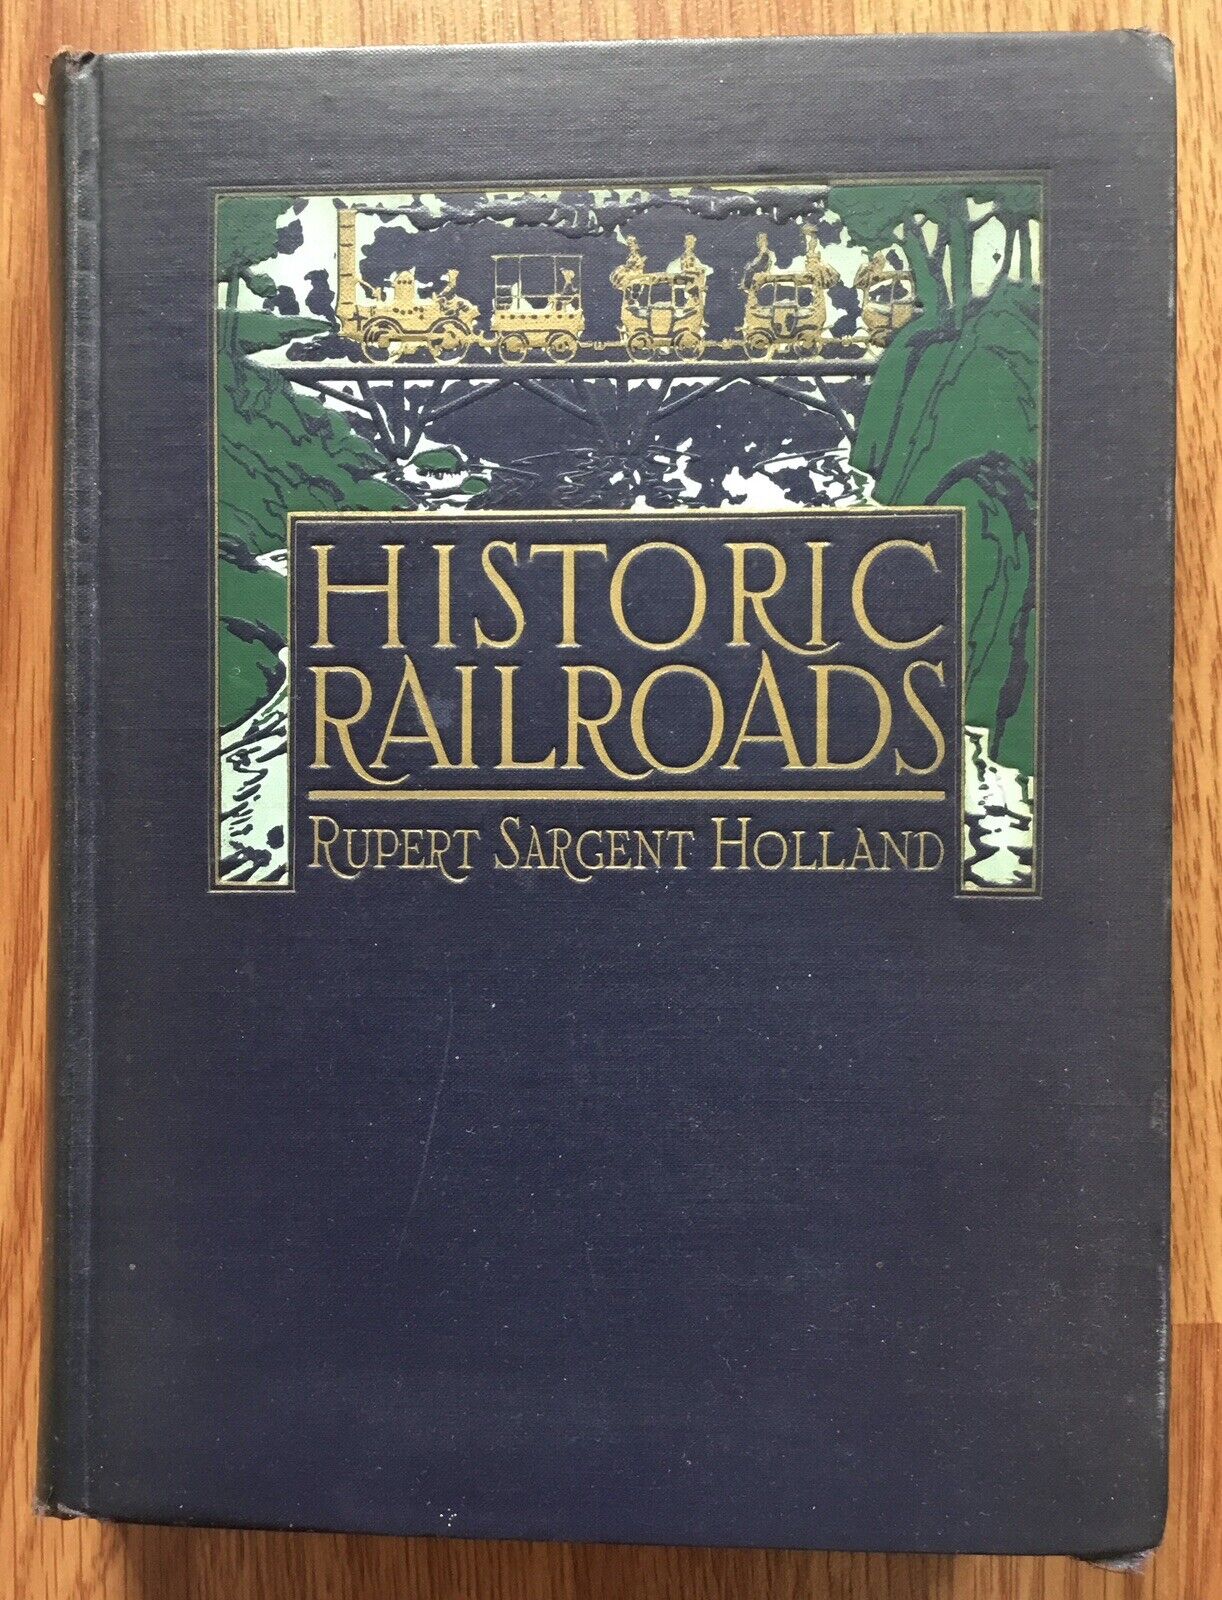 HISTORIC RAILROADS by Rupert Sargent Holland / Old Illustrated Train Book 1927